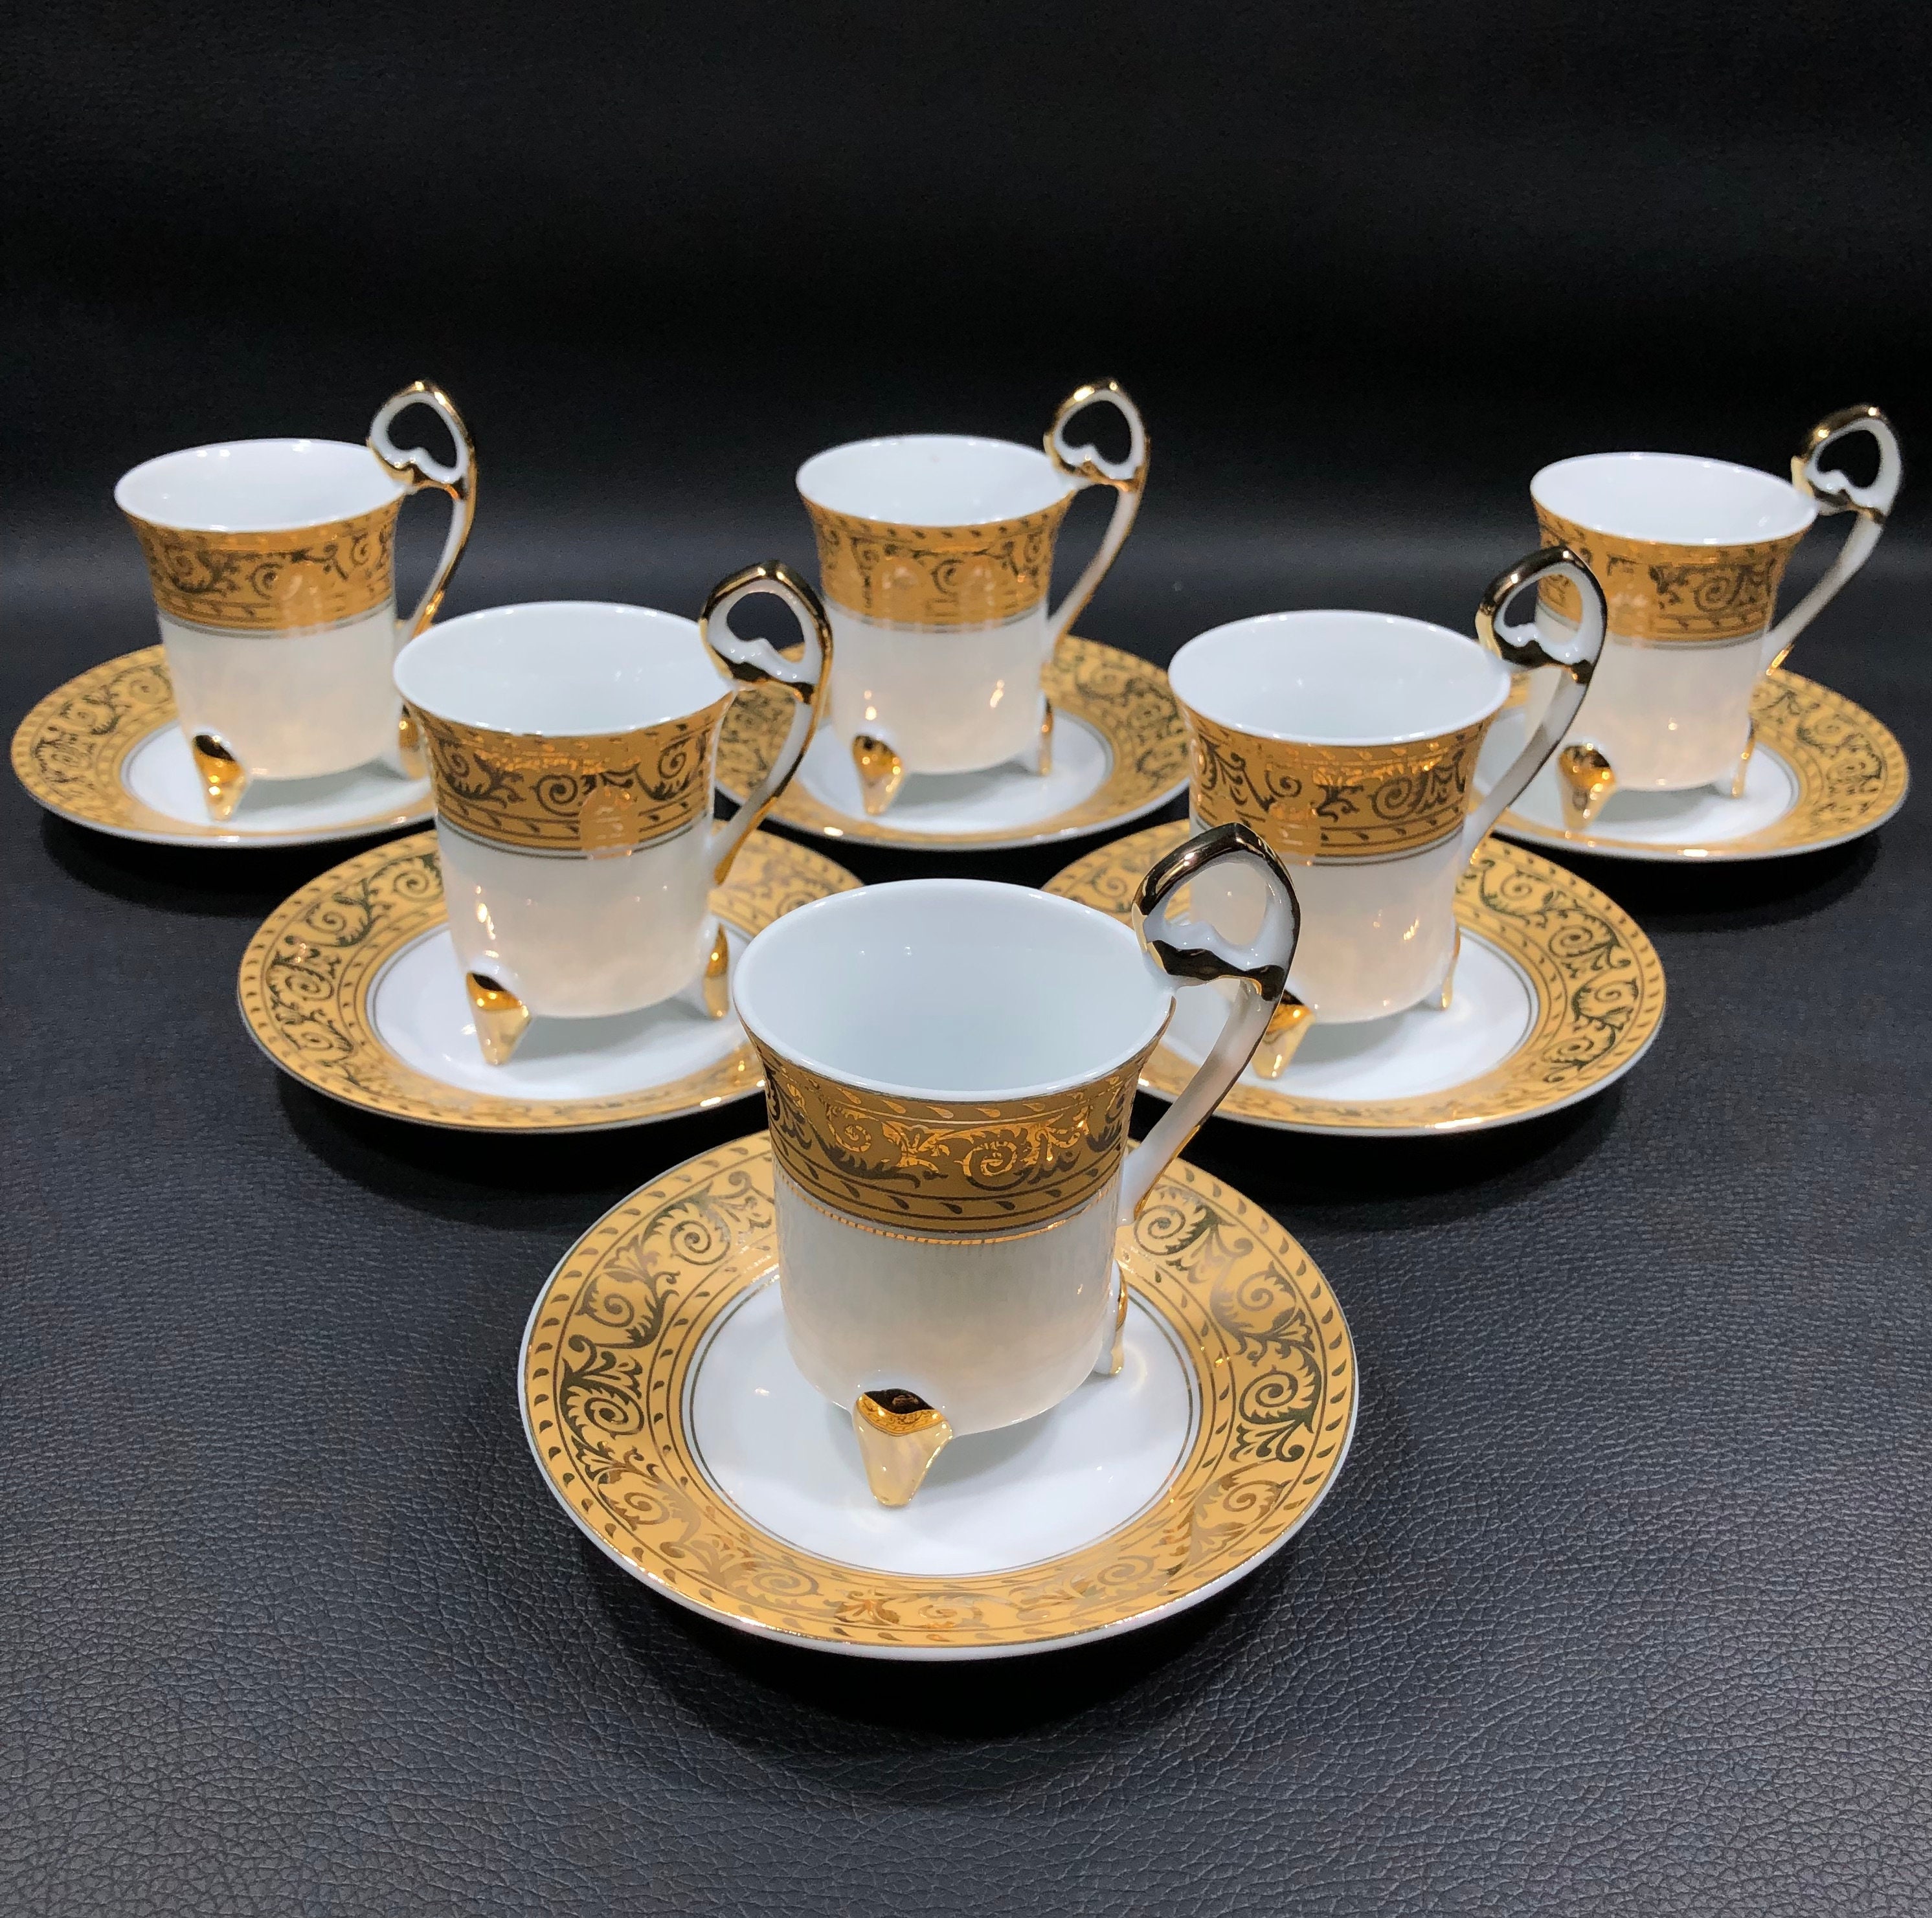 6-pieces Espresso Cups with Saucers and Metal Stand Stoneware Cup & Saucer  Sets, Stackable espresso mugs, 4oz coffee cups set, Set of 6, Black